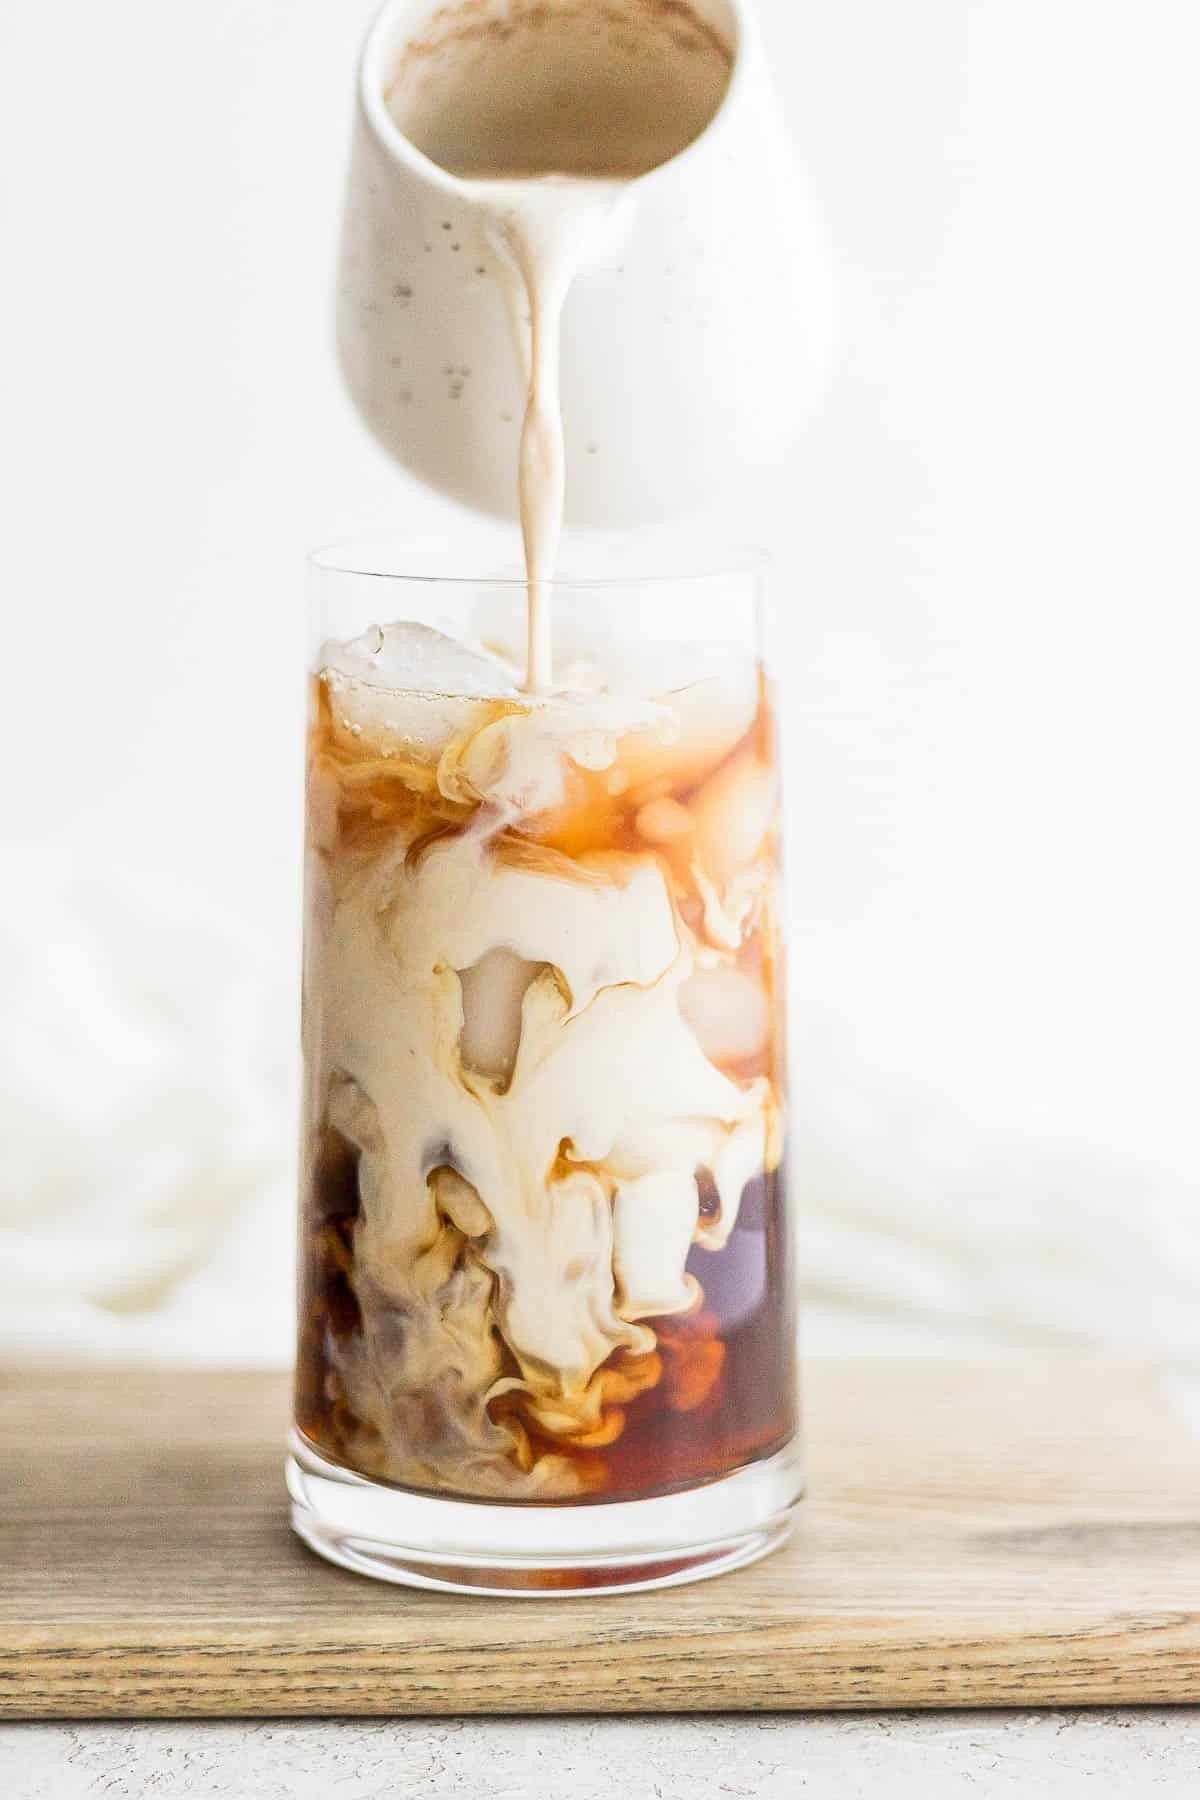 How to Make Cold Brew Coffee {5 Fun Flavors} - The Girl on Bloor